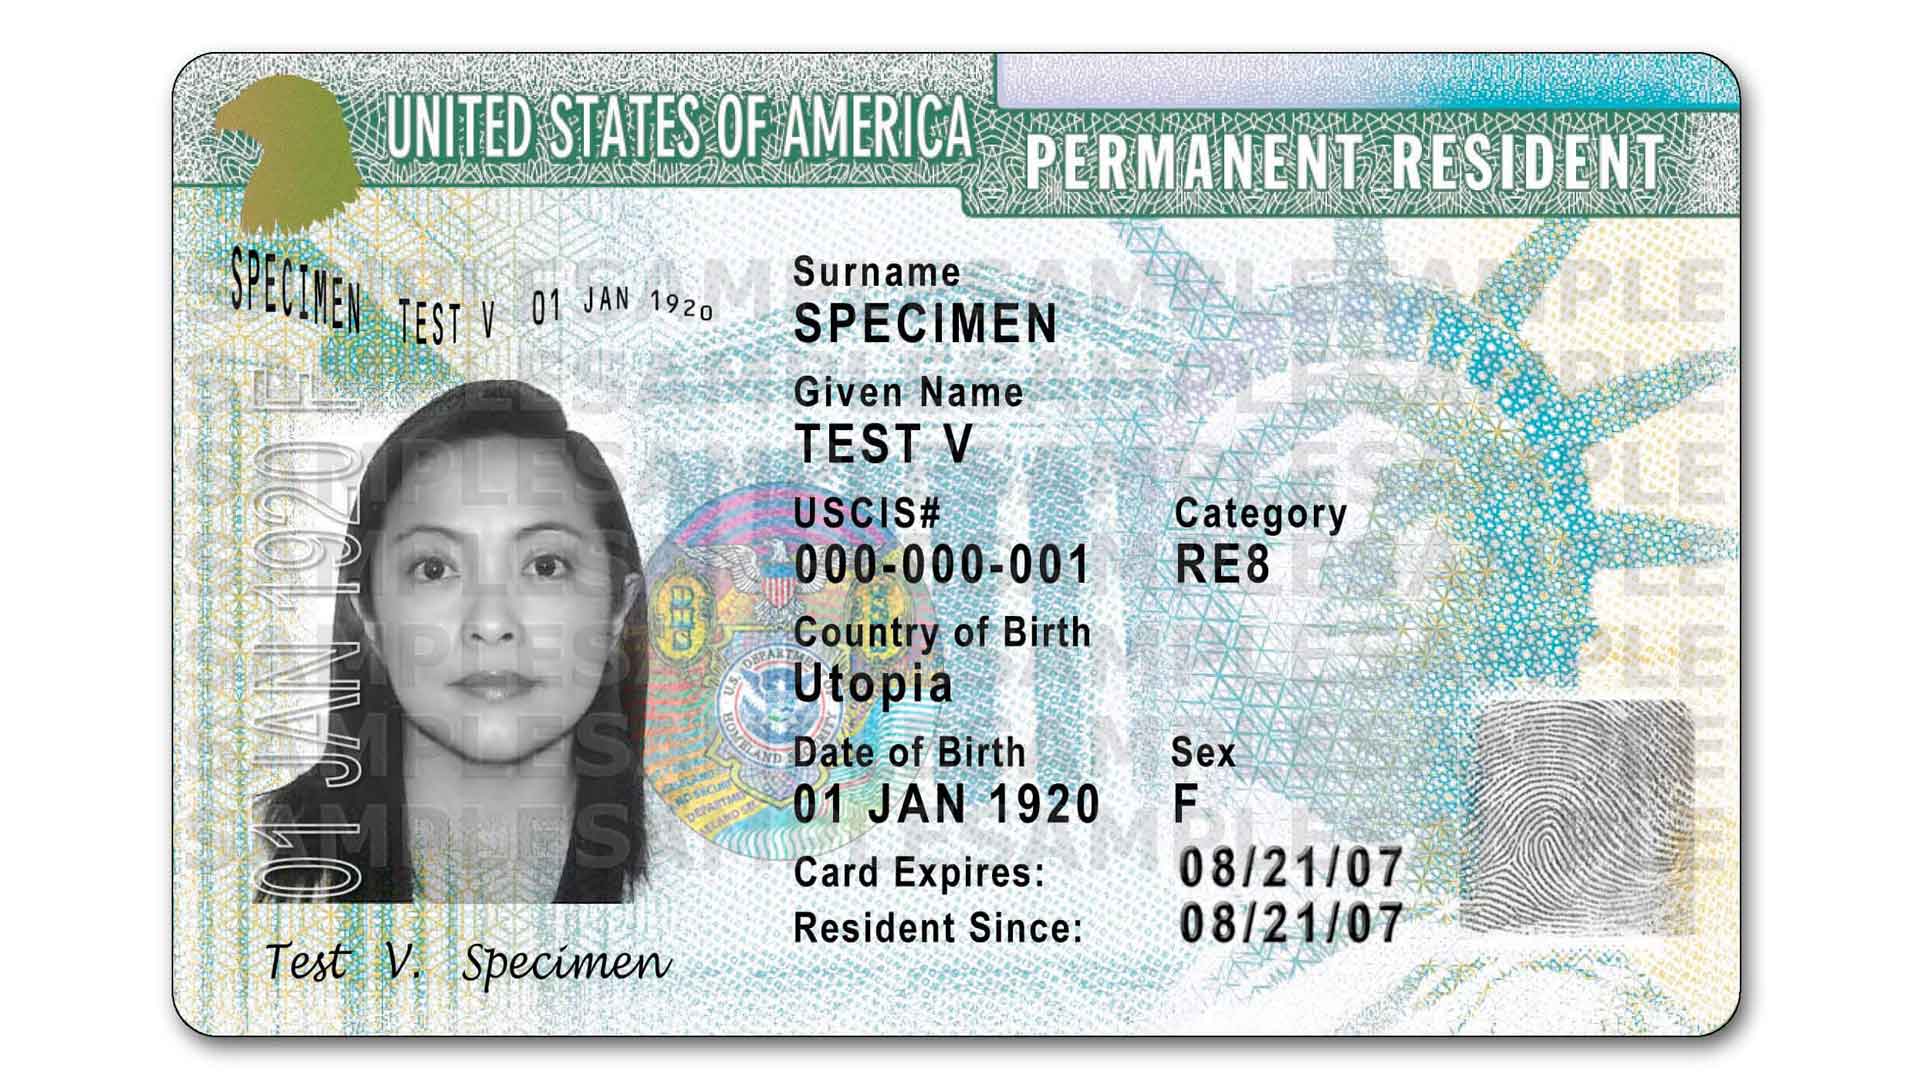 A sample of a U.S. permanent resident card.